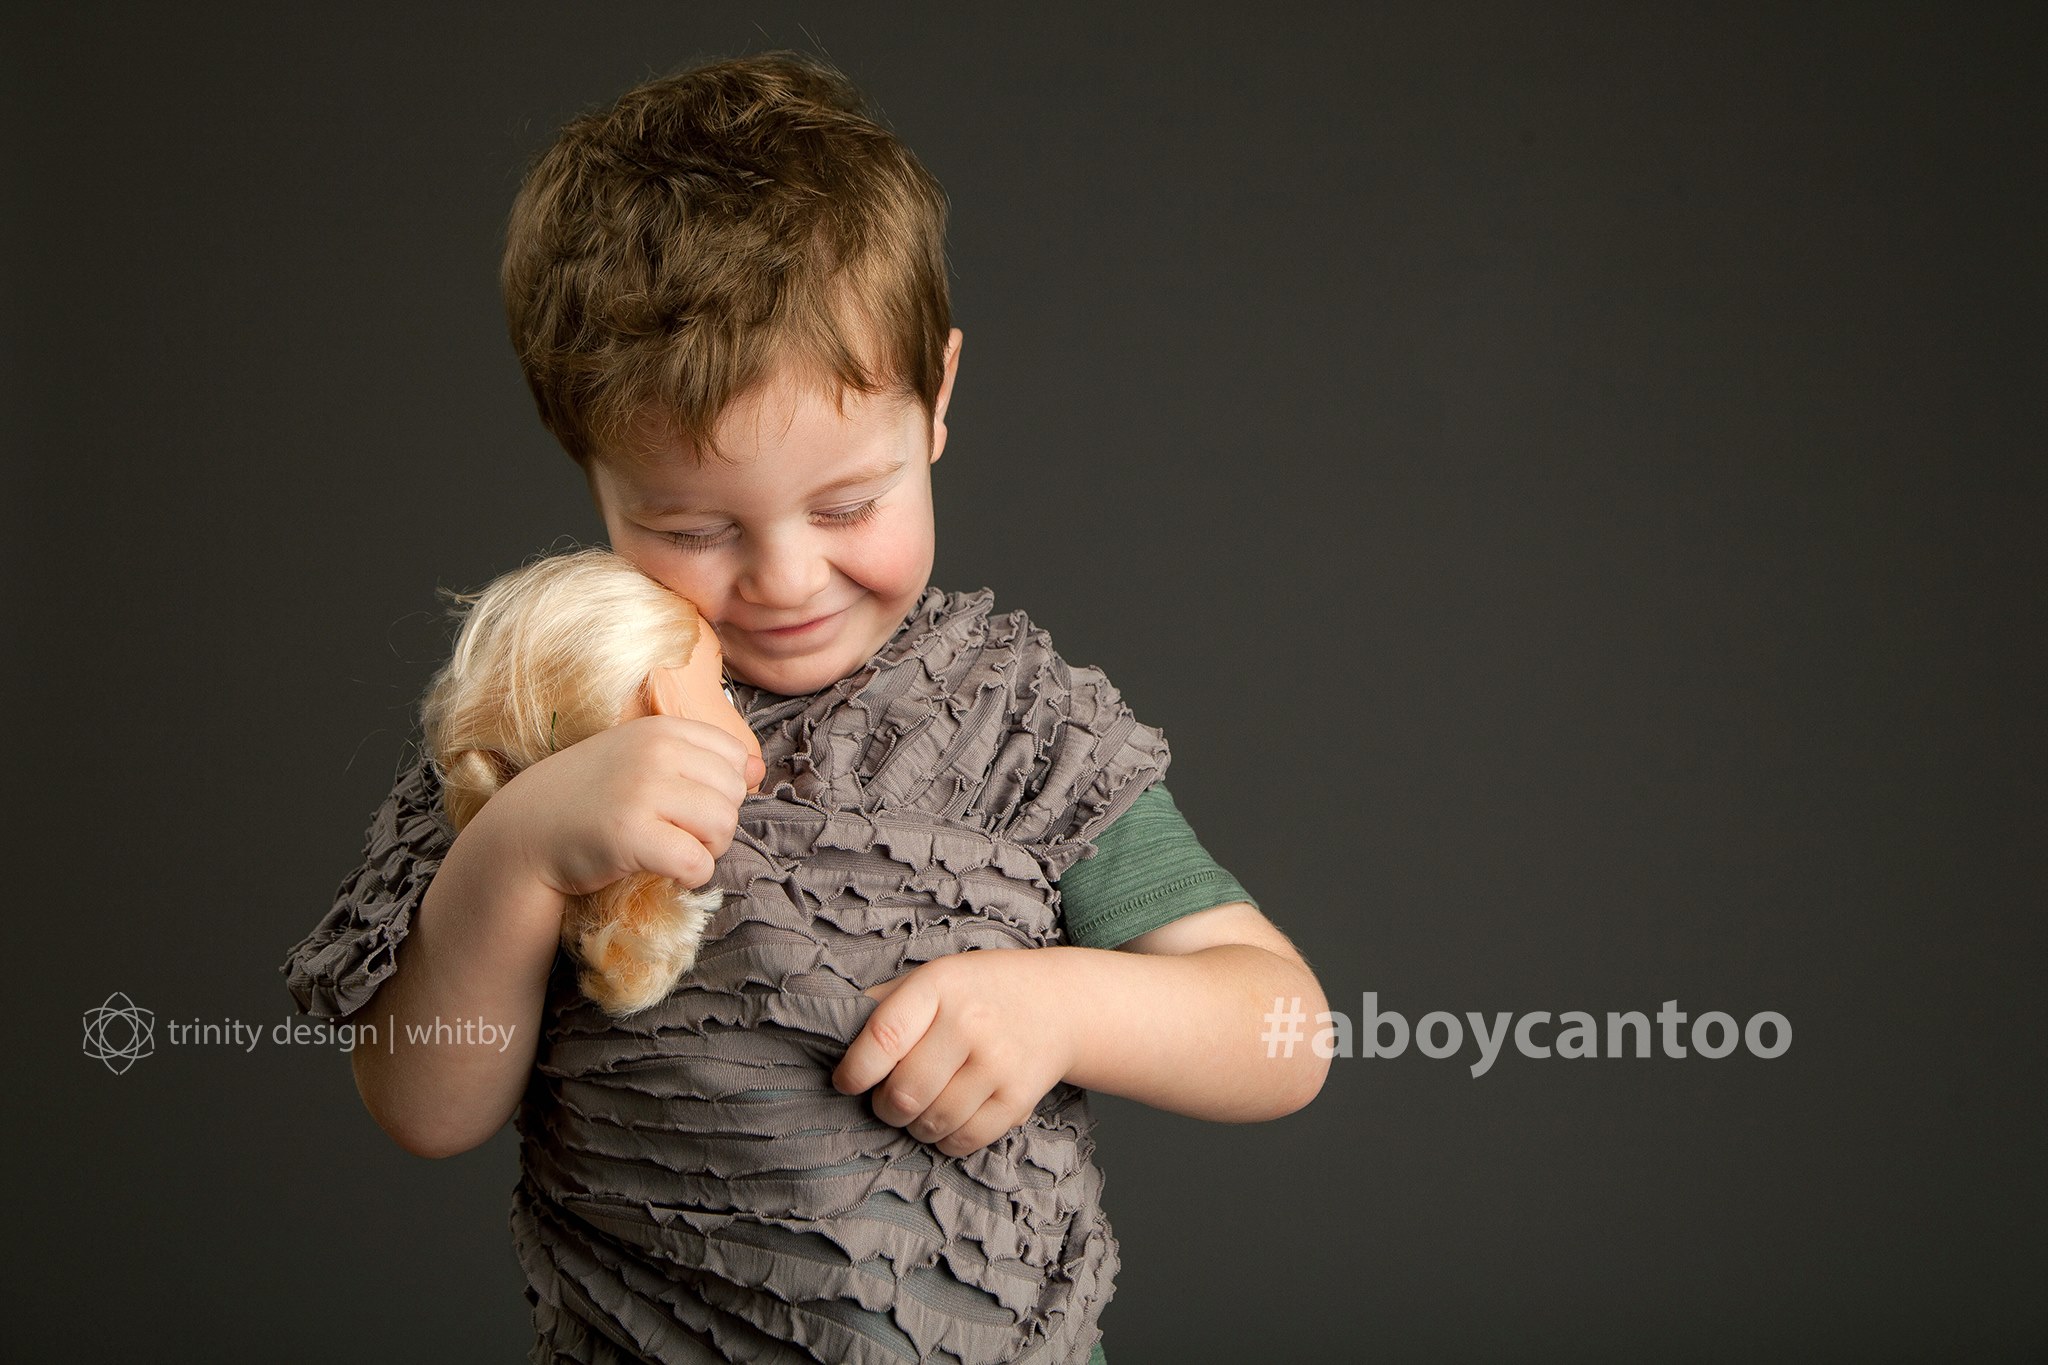 #aboycantoo - photographic series documenting boys who like dolls, dress-up, and dancing too